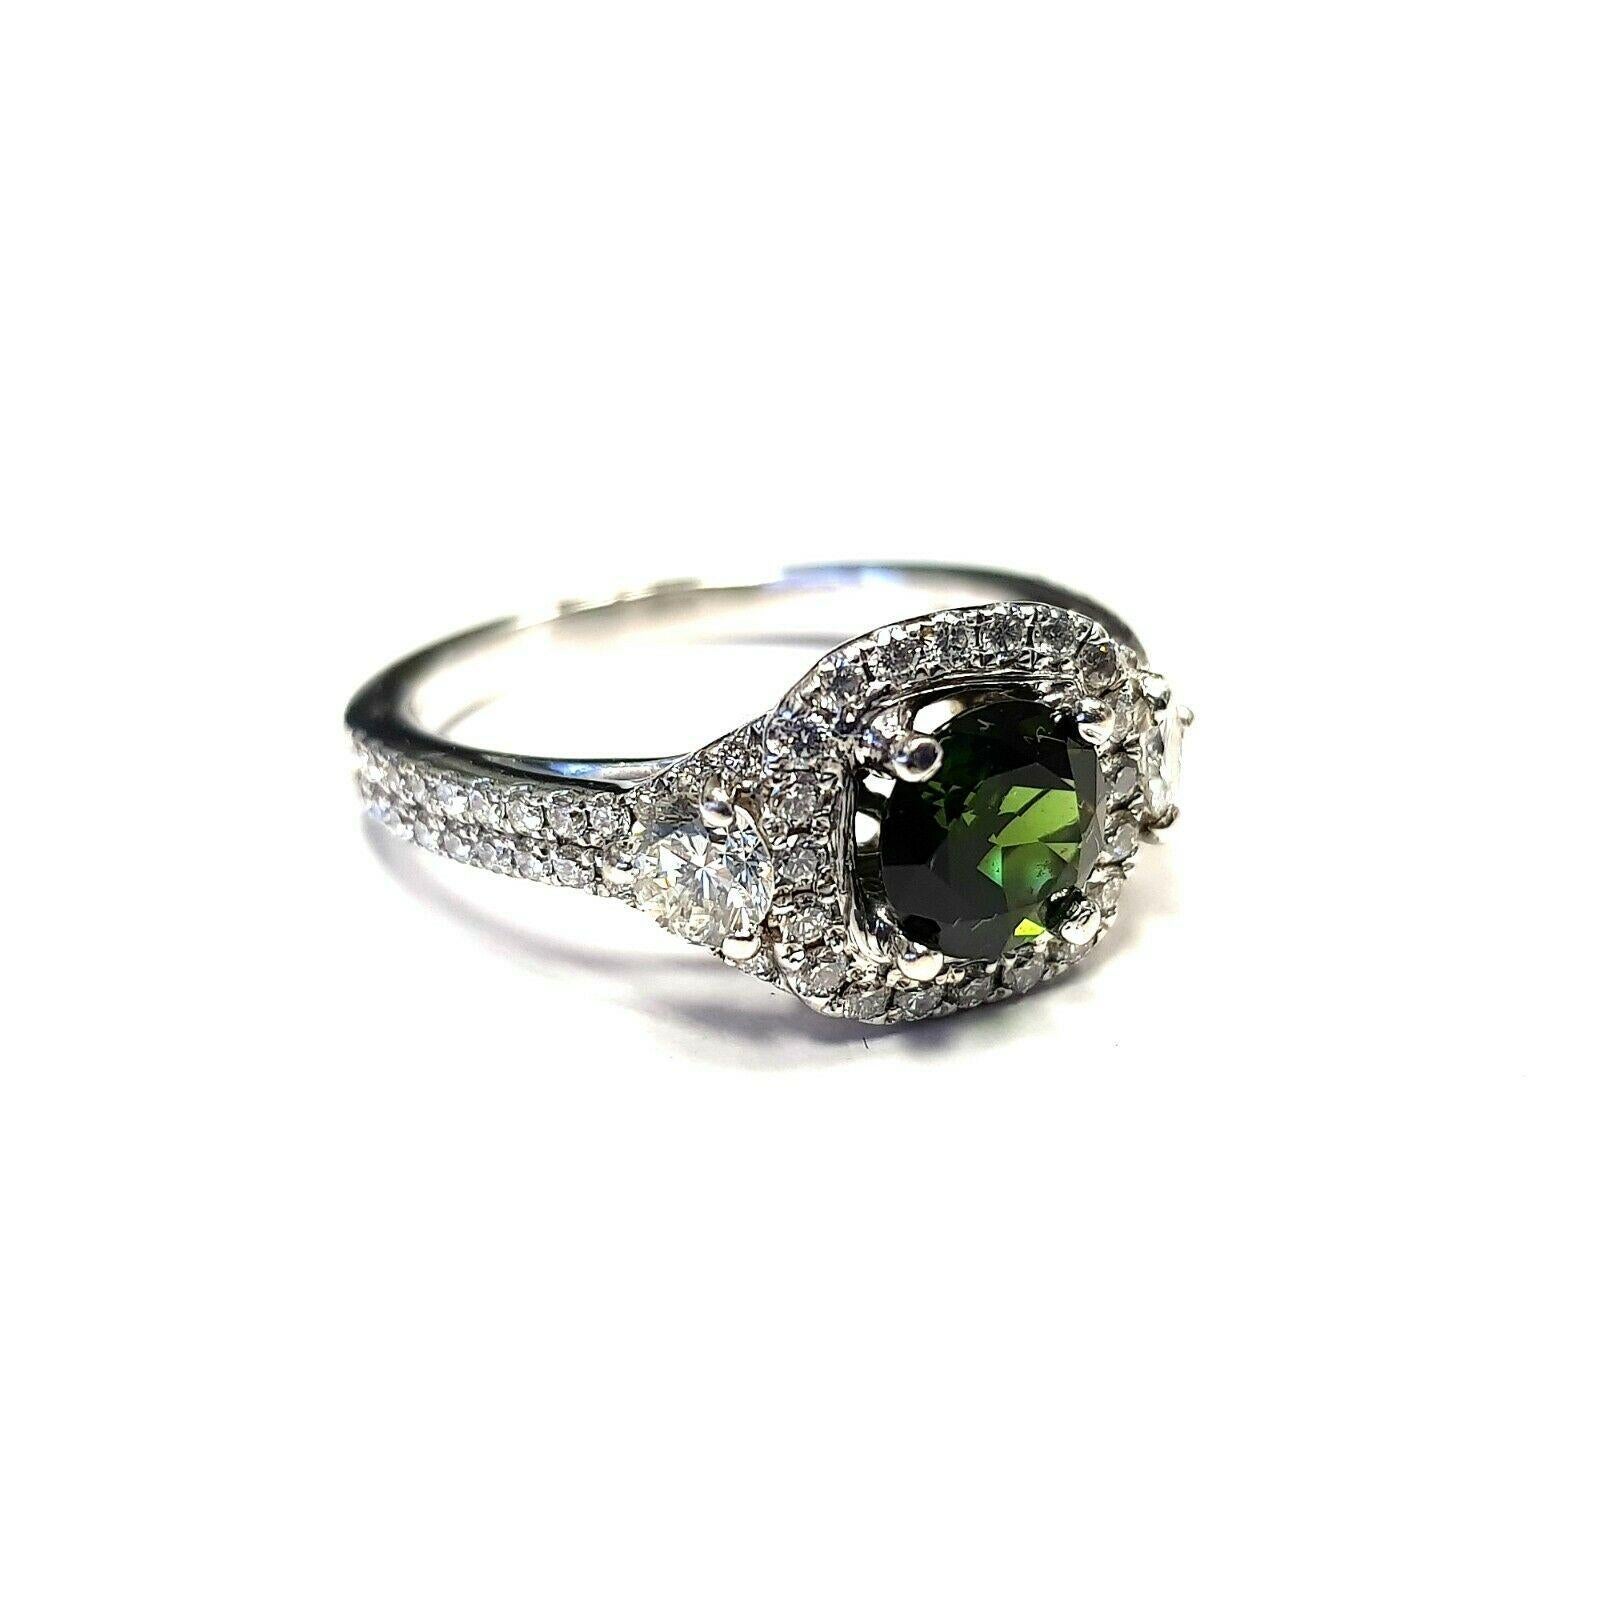  This is a 14k white gold ring with green tourmaline in center and approximately 0.60ct diamonds.  The ring is currently 6.5 in US size, but I can get it resized a bit. 
Specifications:
    main stone: GREEN TOURMALINE 0.80CT
    additional: